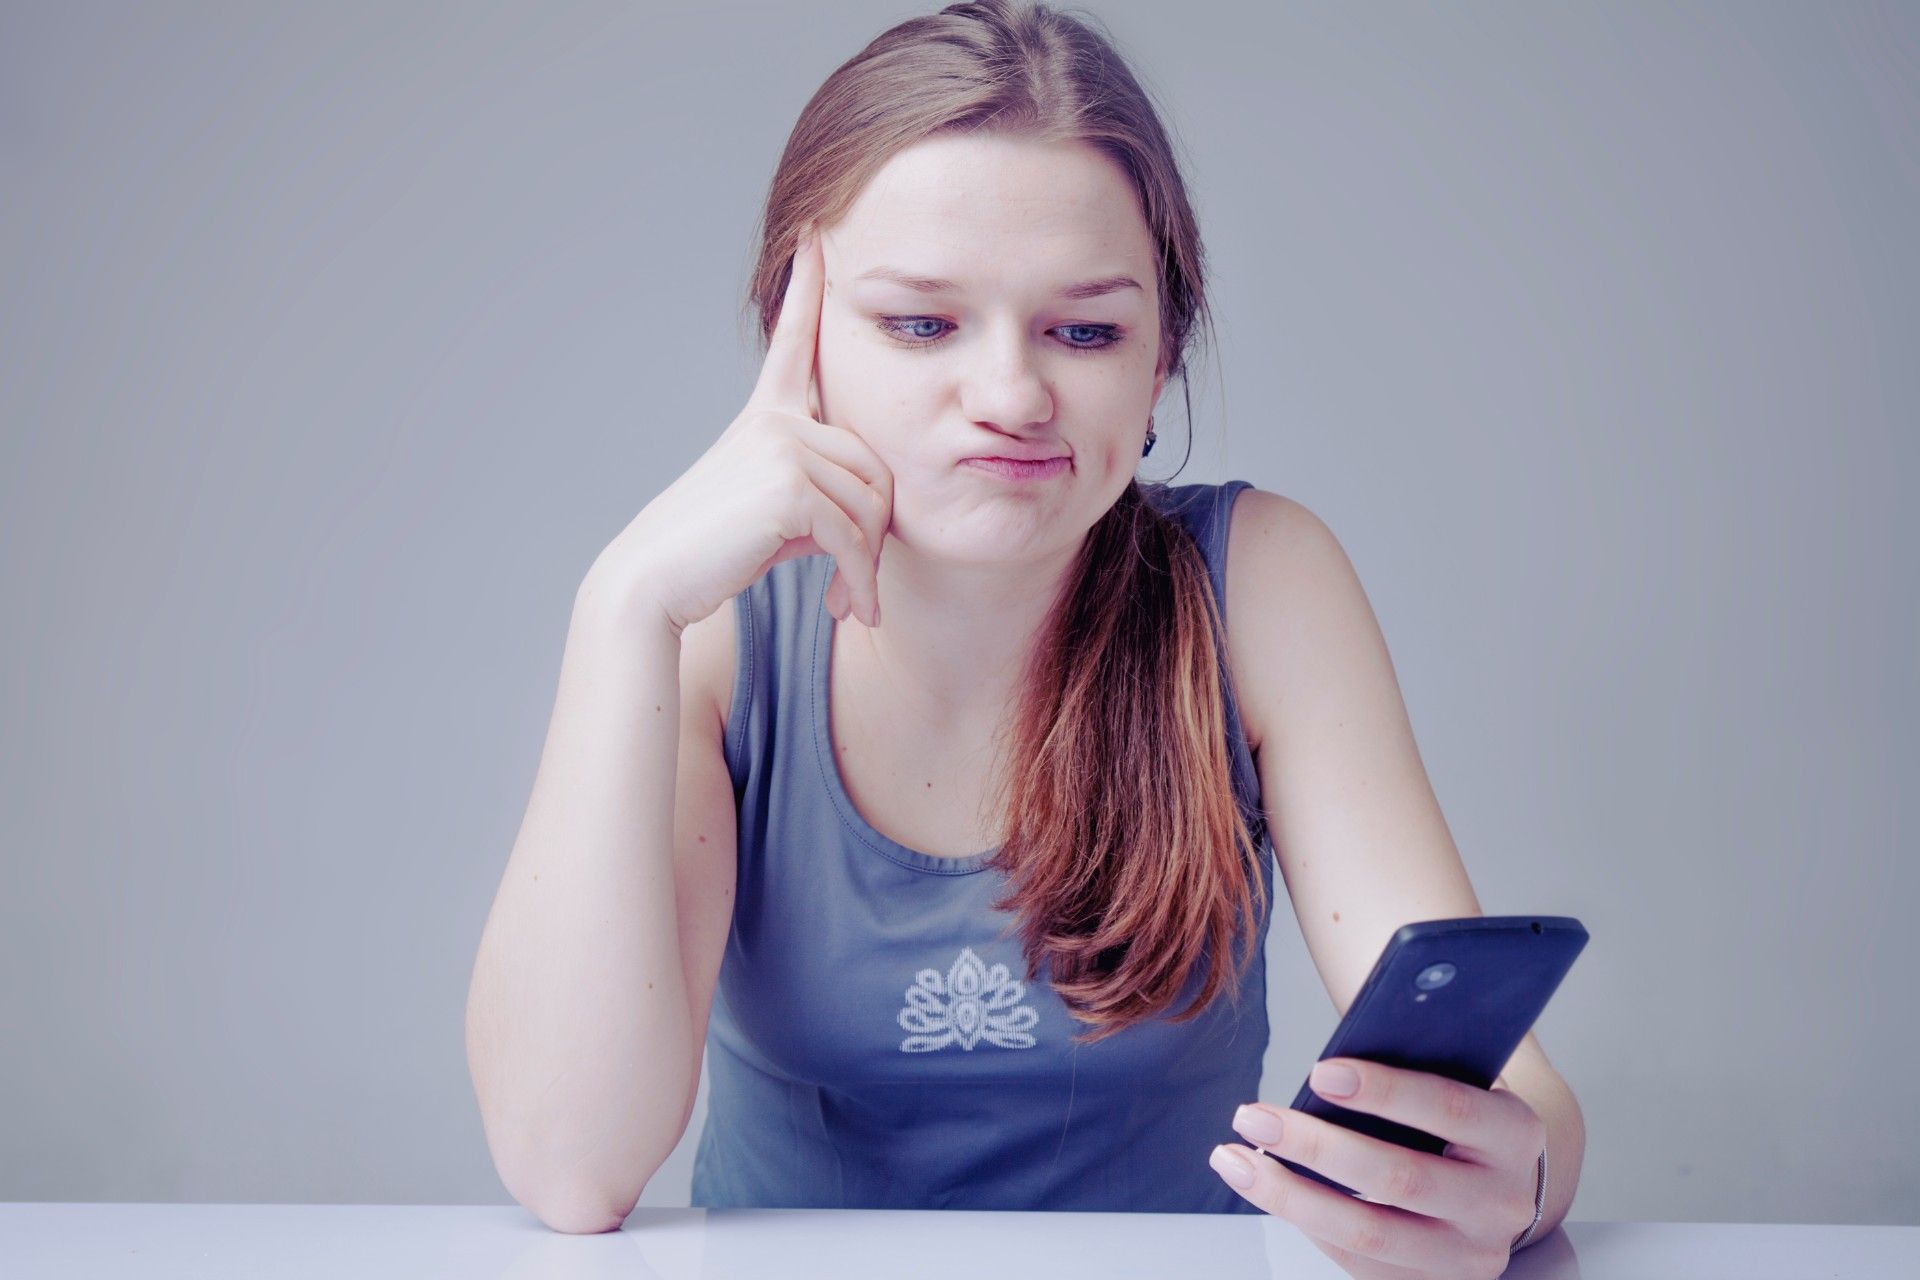 Annoyed girl looks at smartphone in her hand - nasty gal promo code